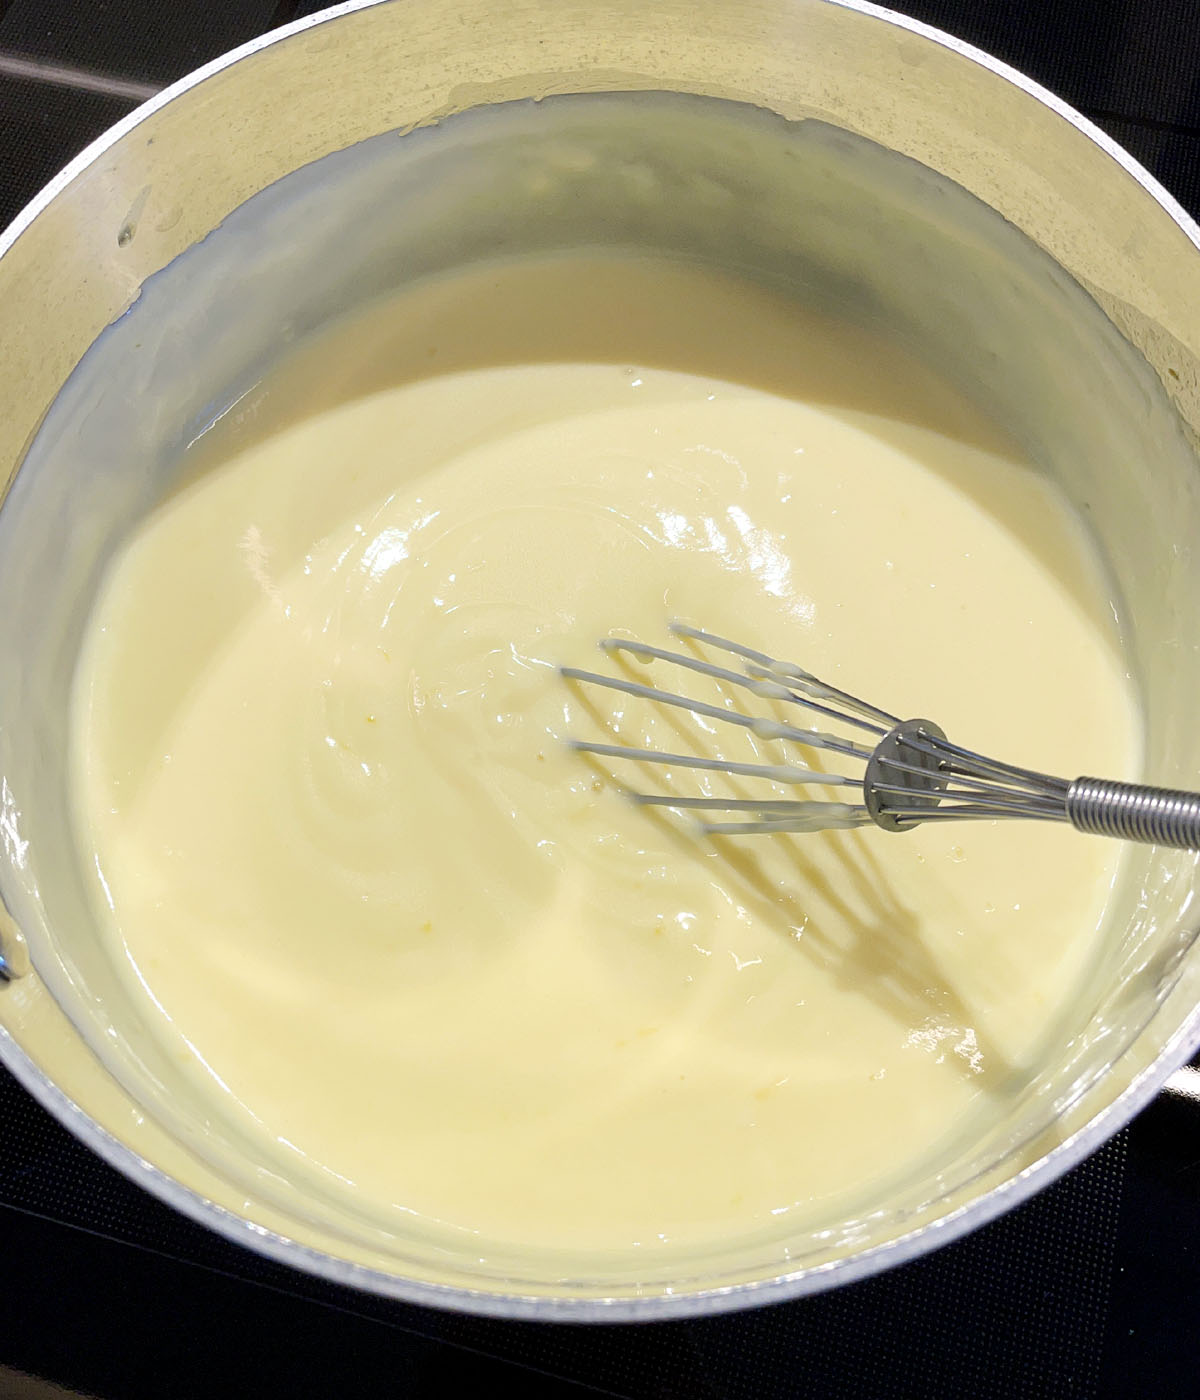 A whisk in a pot of lemon pudding.